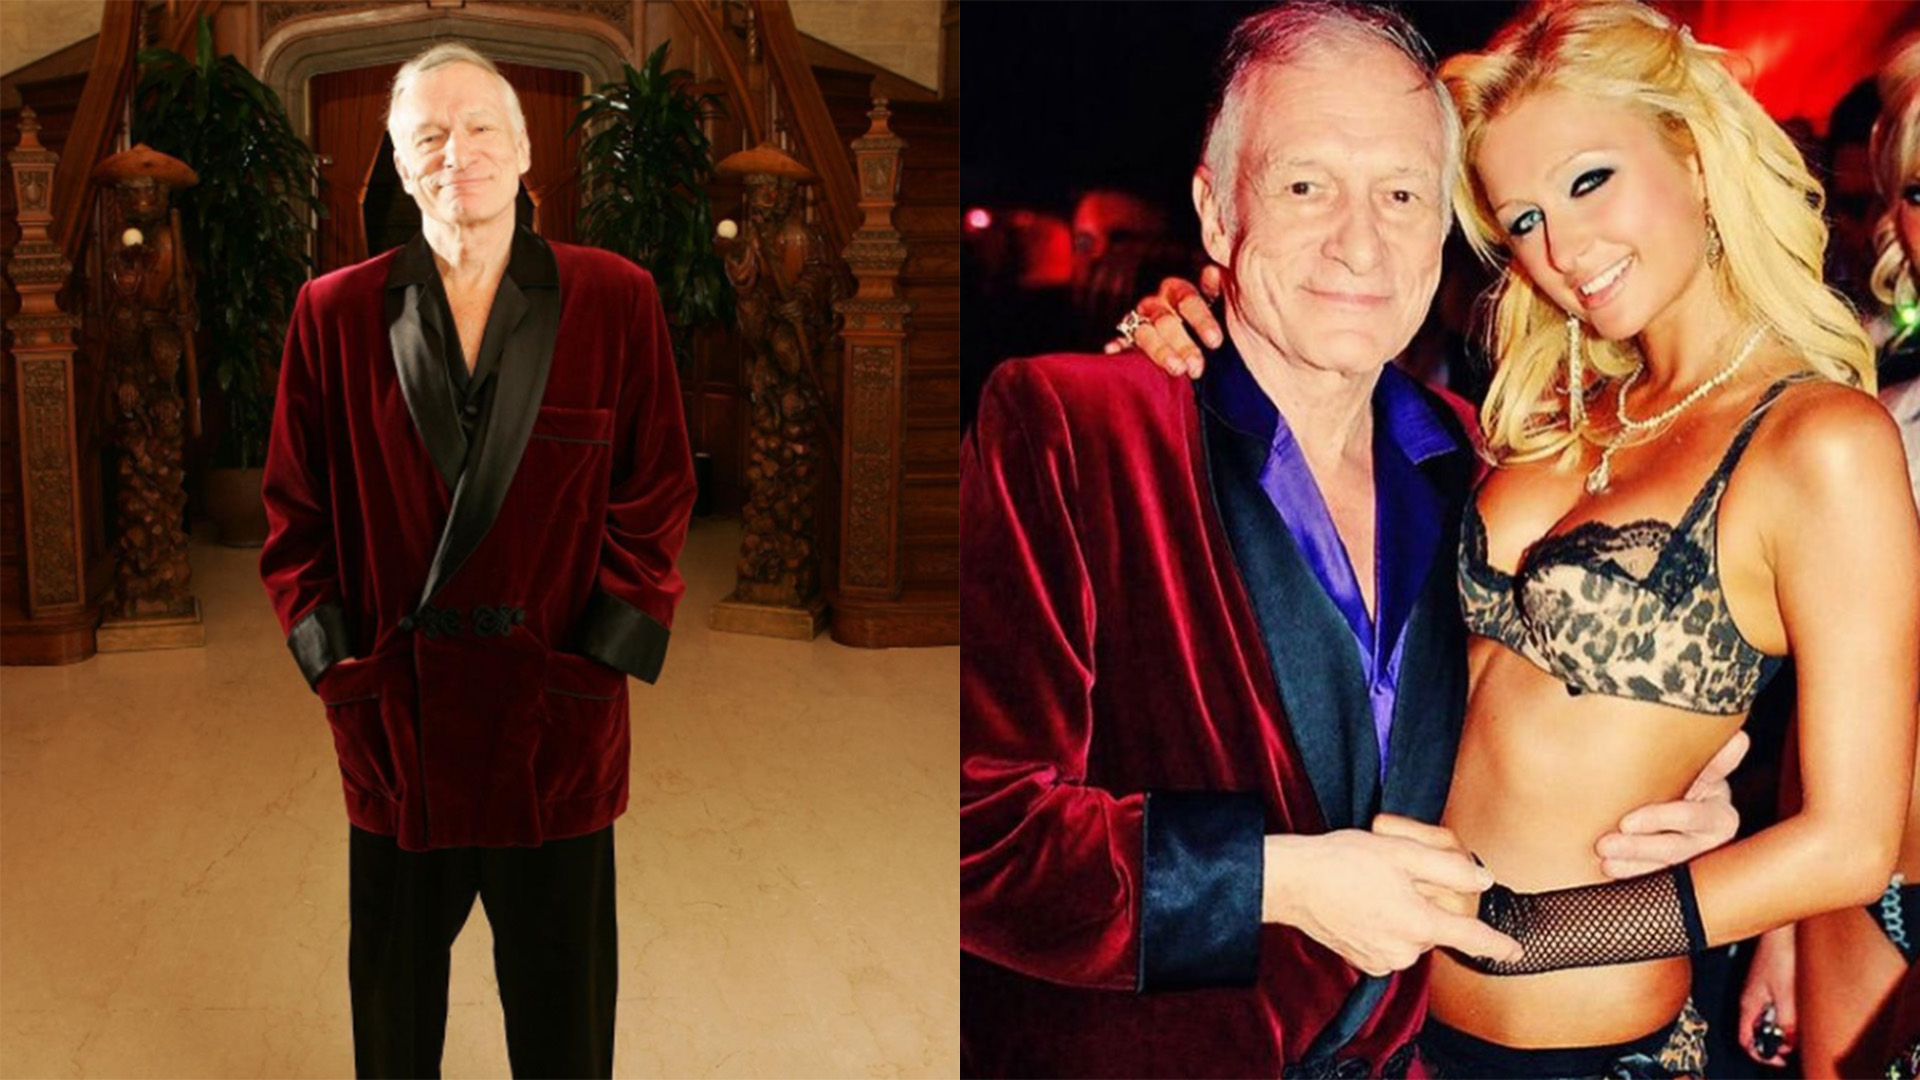 Dirty Sailorhugh Hefner Dumped A Casket Of Private Sex Tapes Into The Ocean